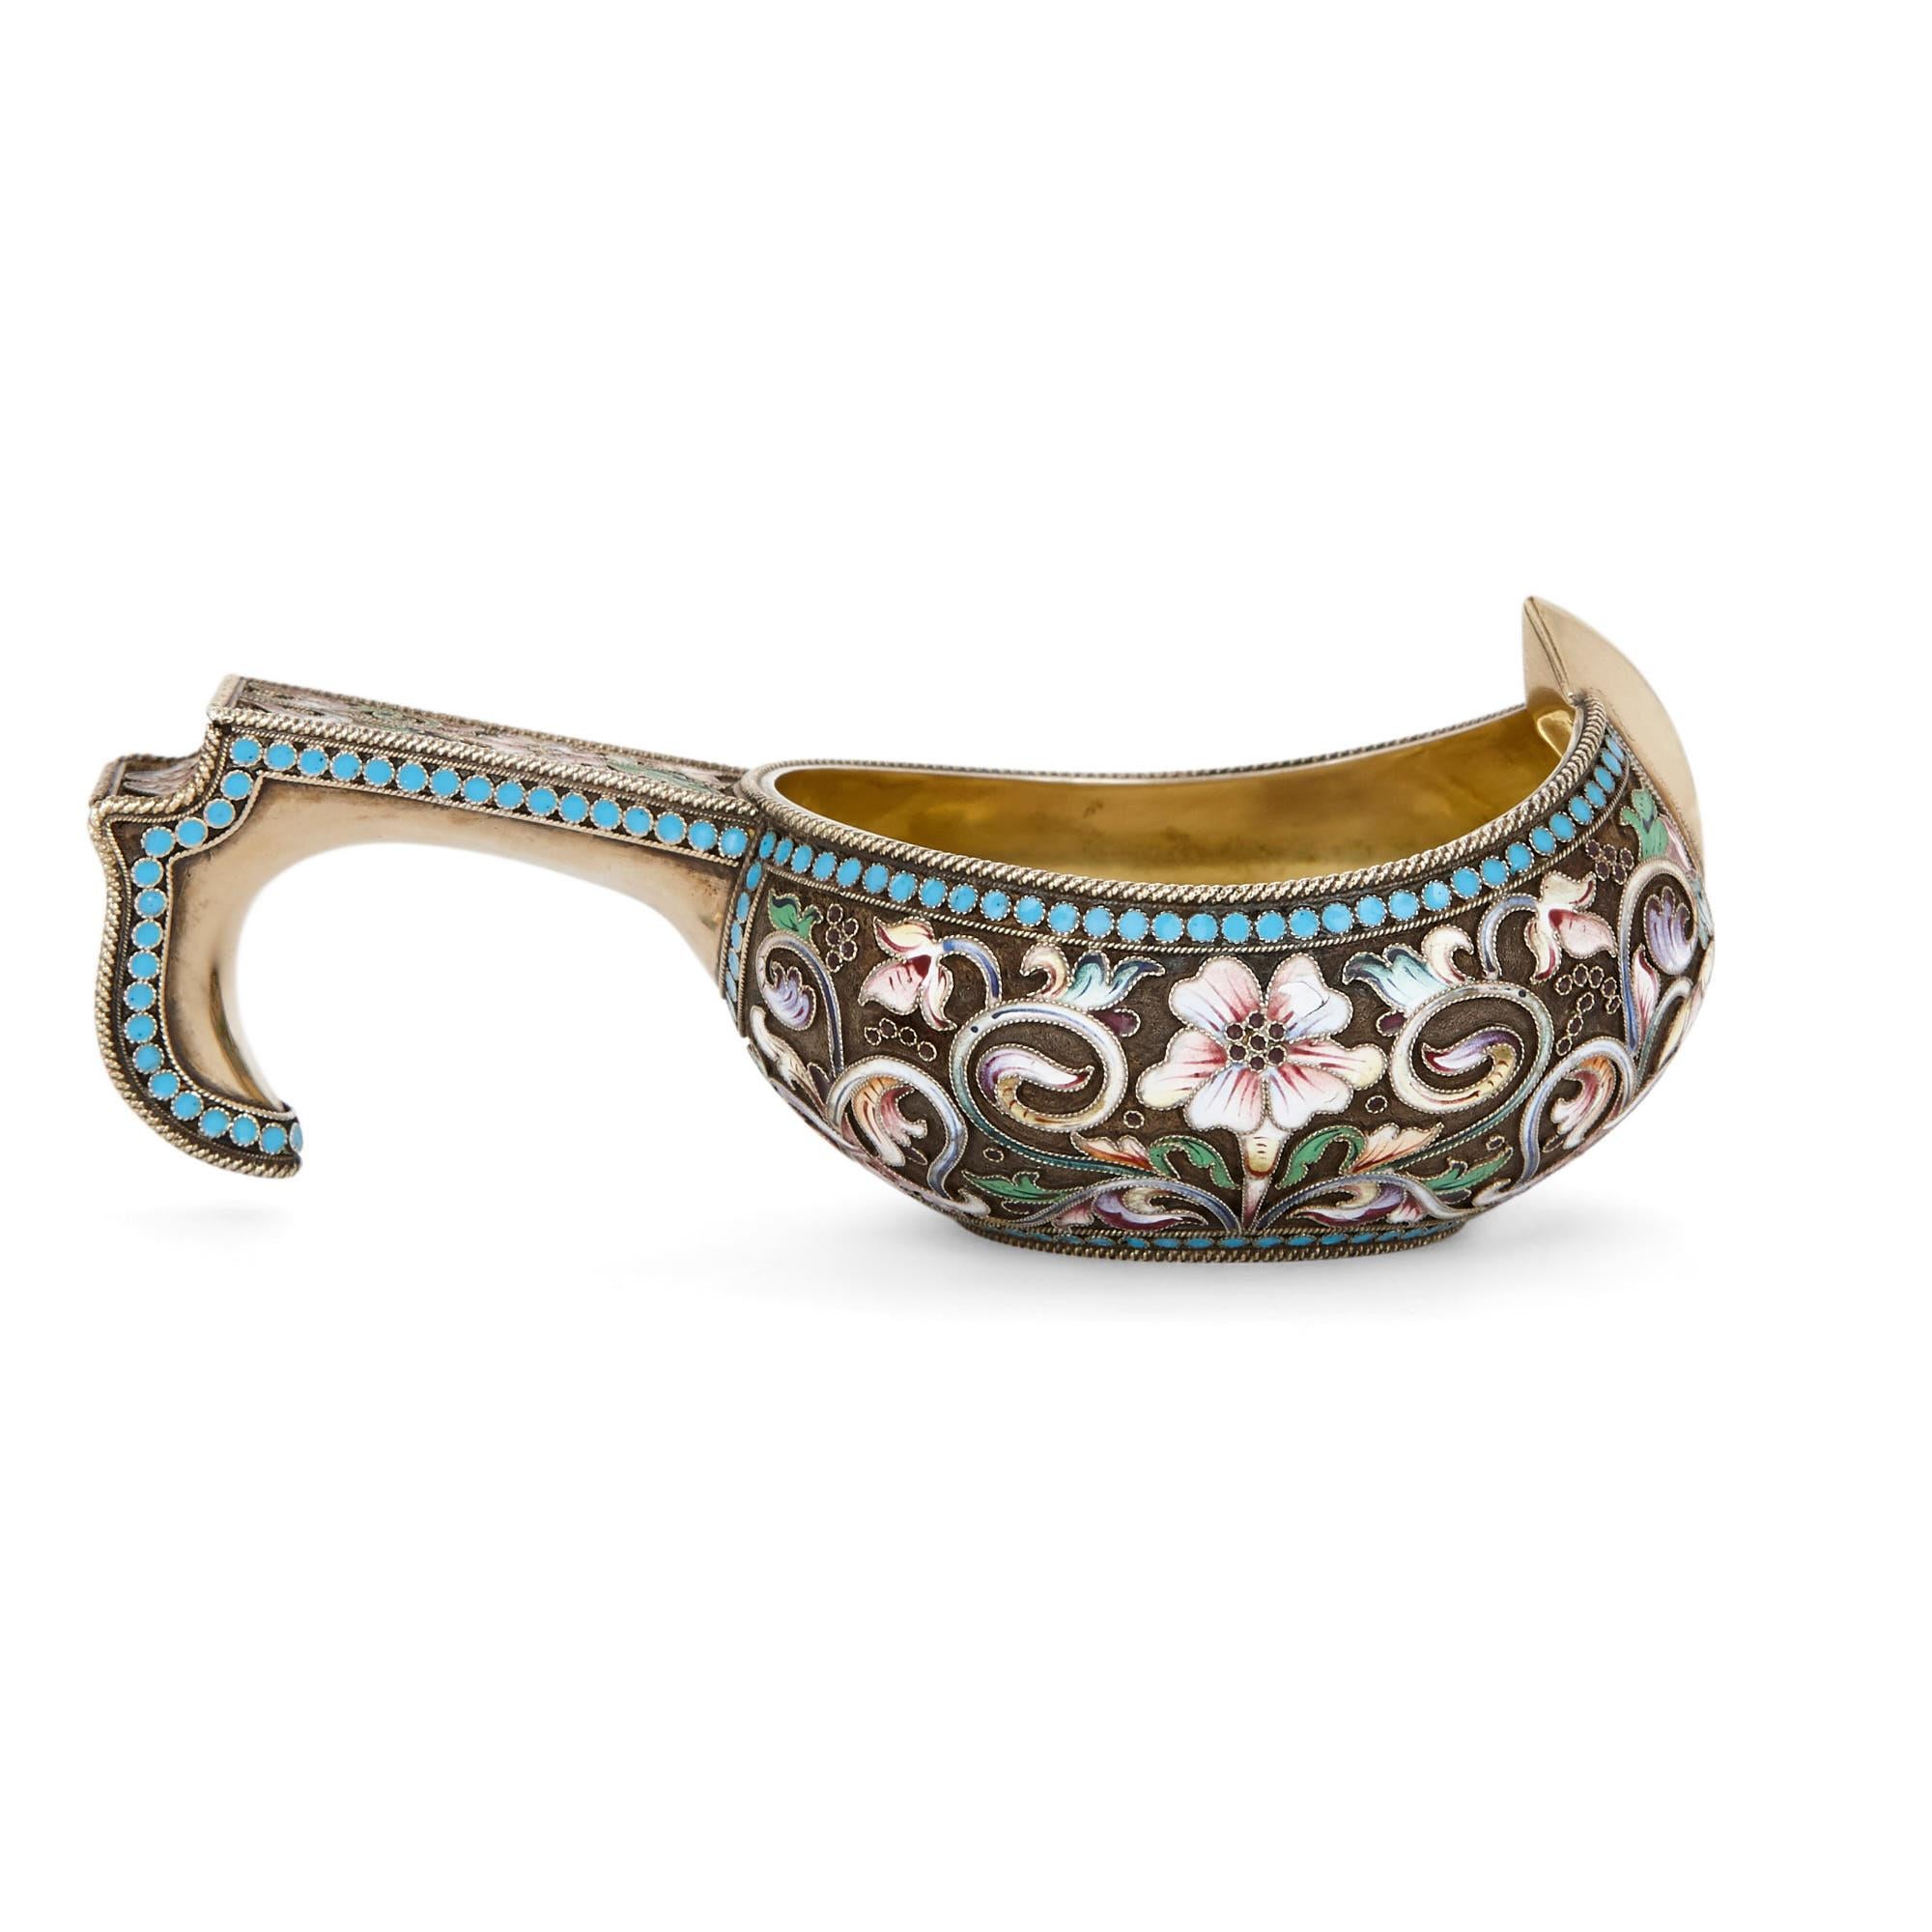 Known as a ‘kovsh’ (or kovsch), this item was designed to function as a small drinking vessel. Kovshes have been created in Russia for centuries, often from precious materials, such as silver, gold, gemstones and jewels. Particularly exquisite